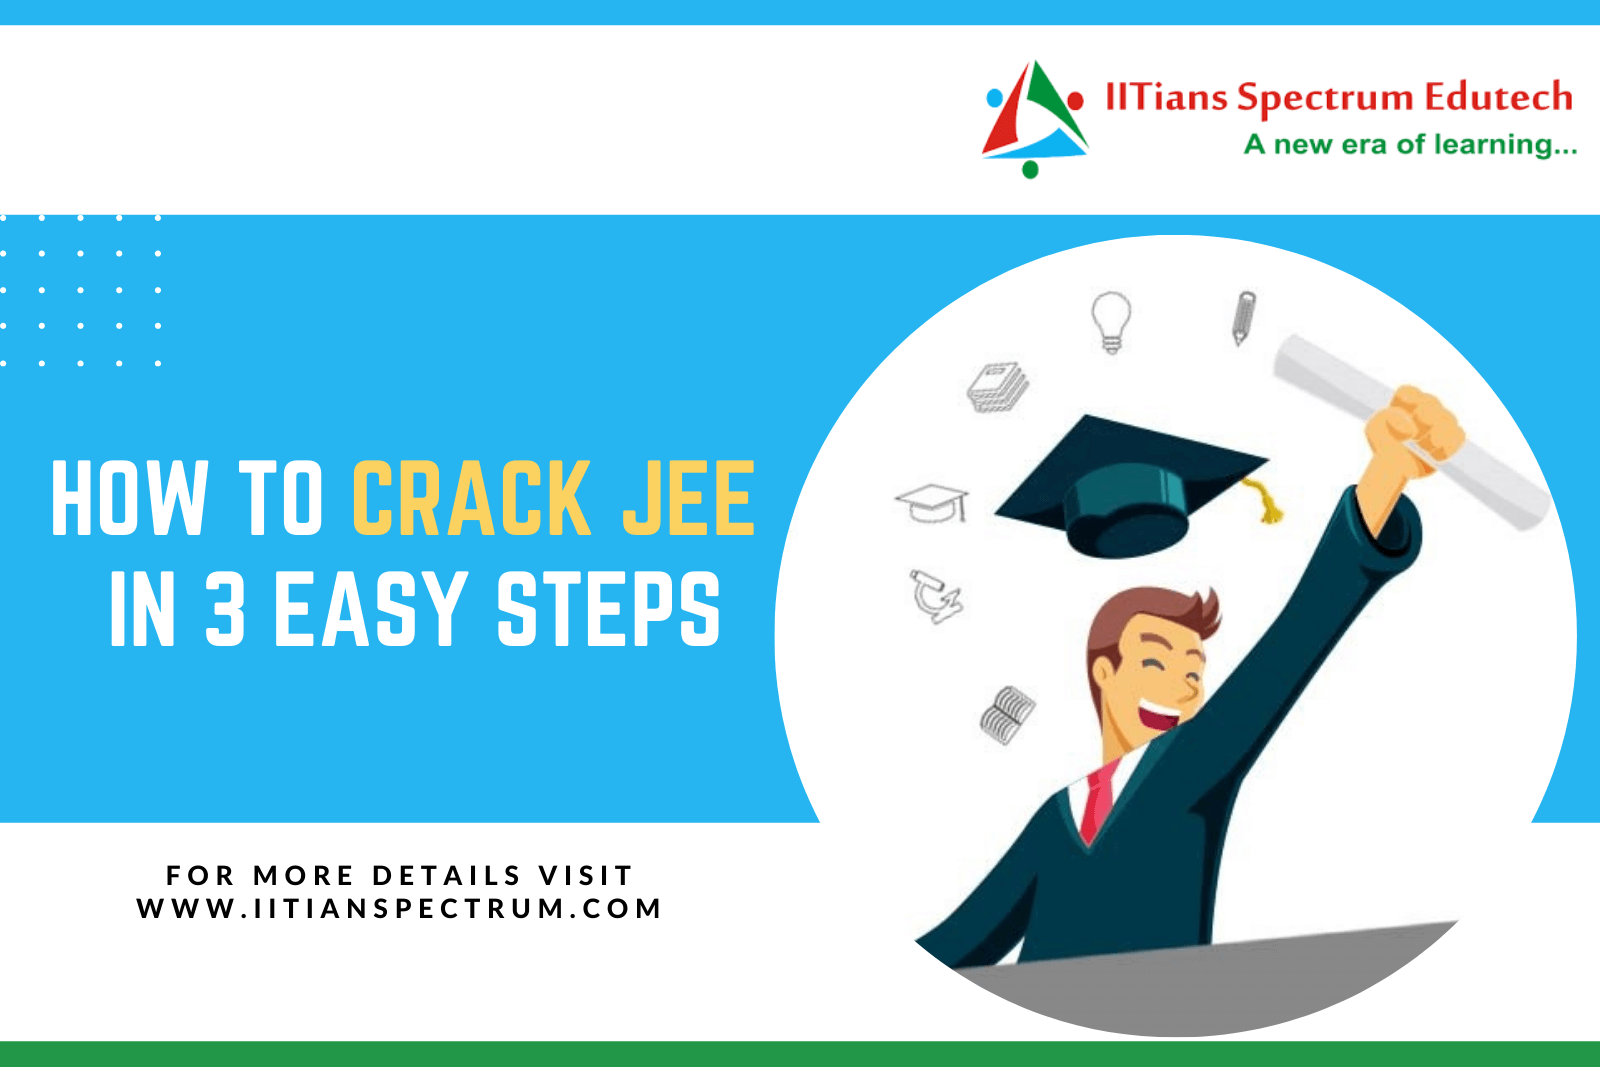 How to Crack JEE in 3 Easy Steps? by Best classes for JEE in mumbai